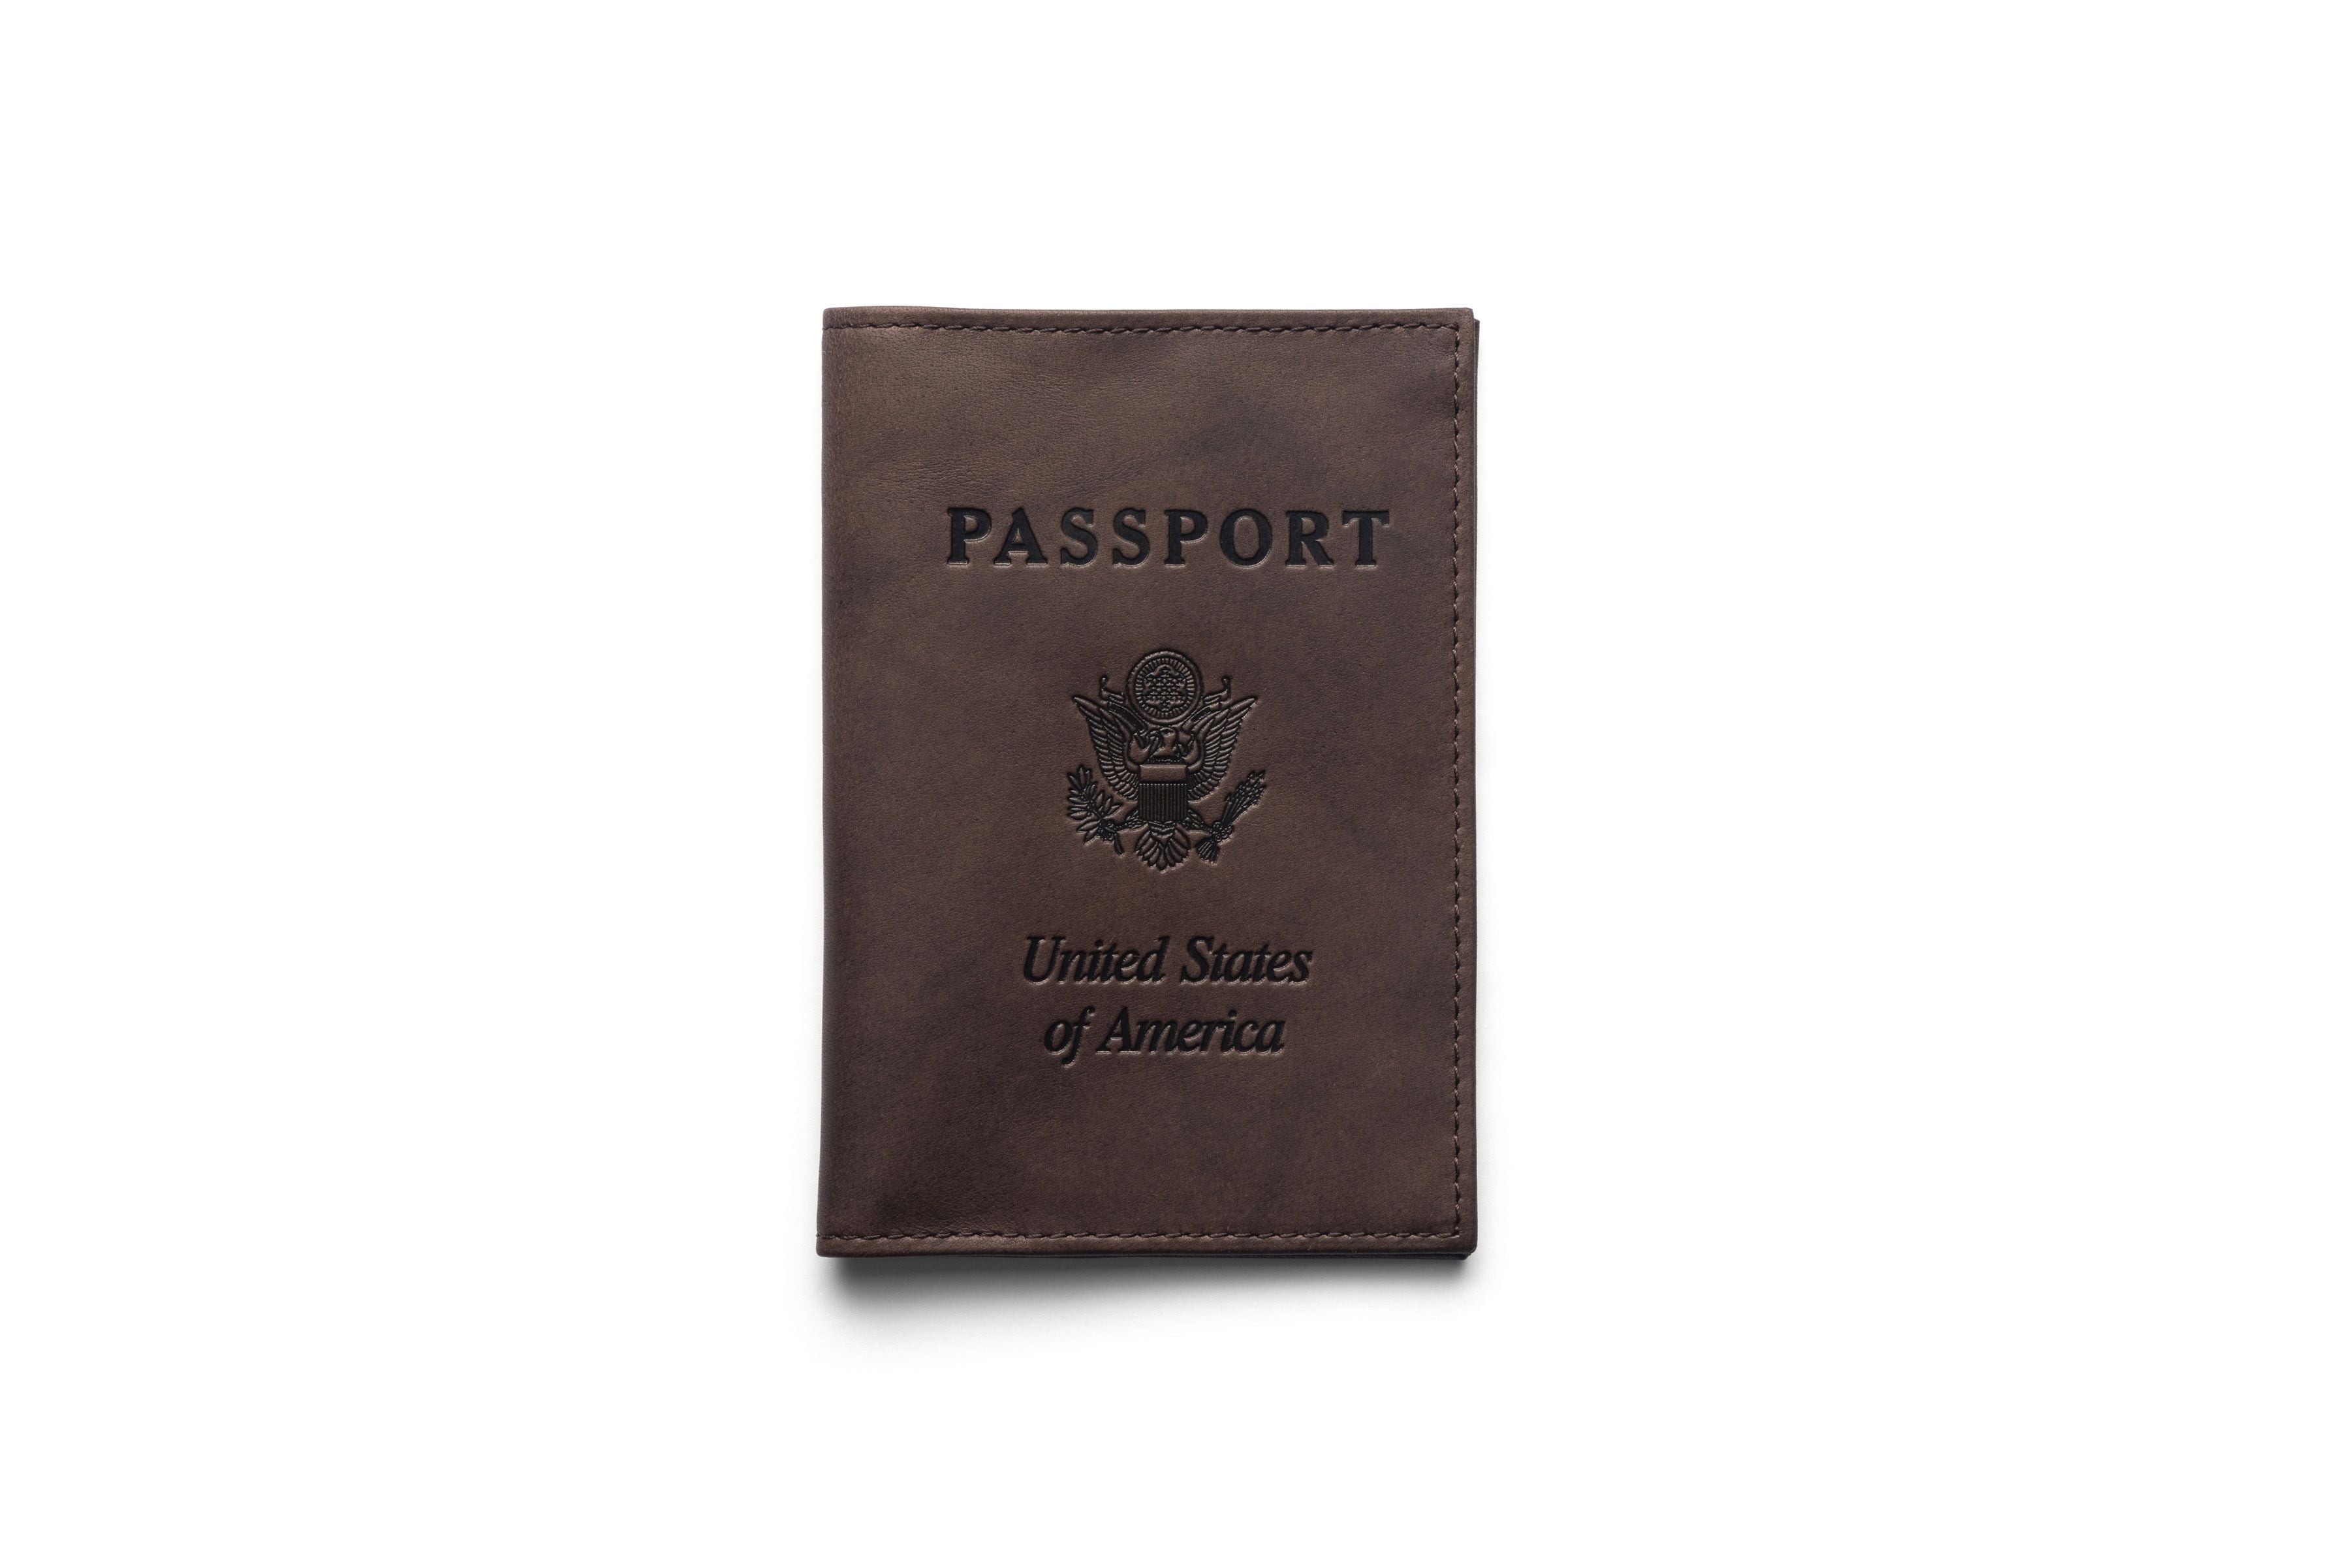 The passport cover you didn't know existed 💕 #passport #passportcover